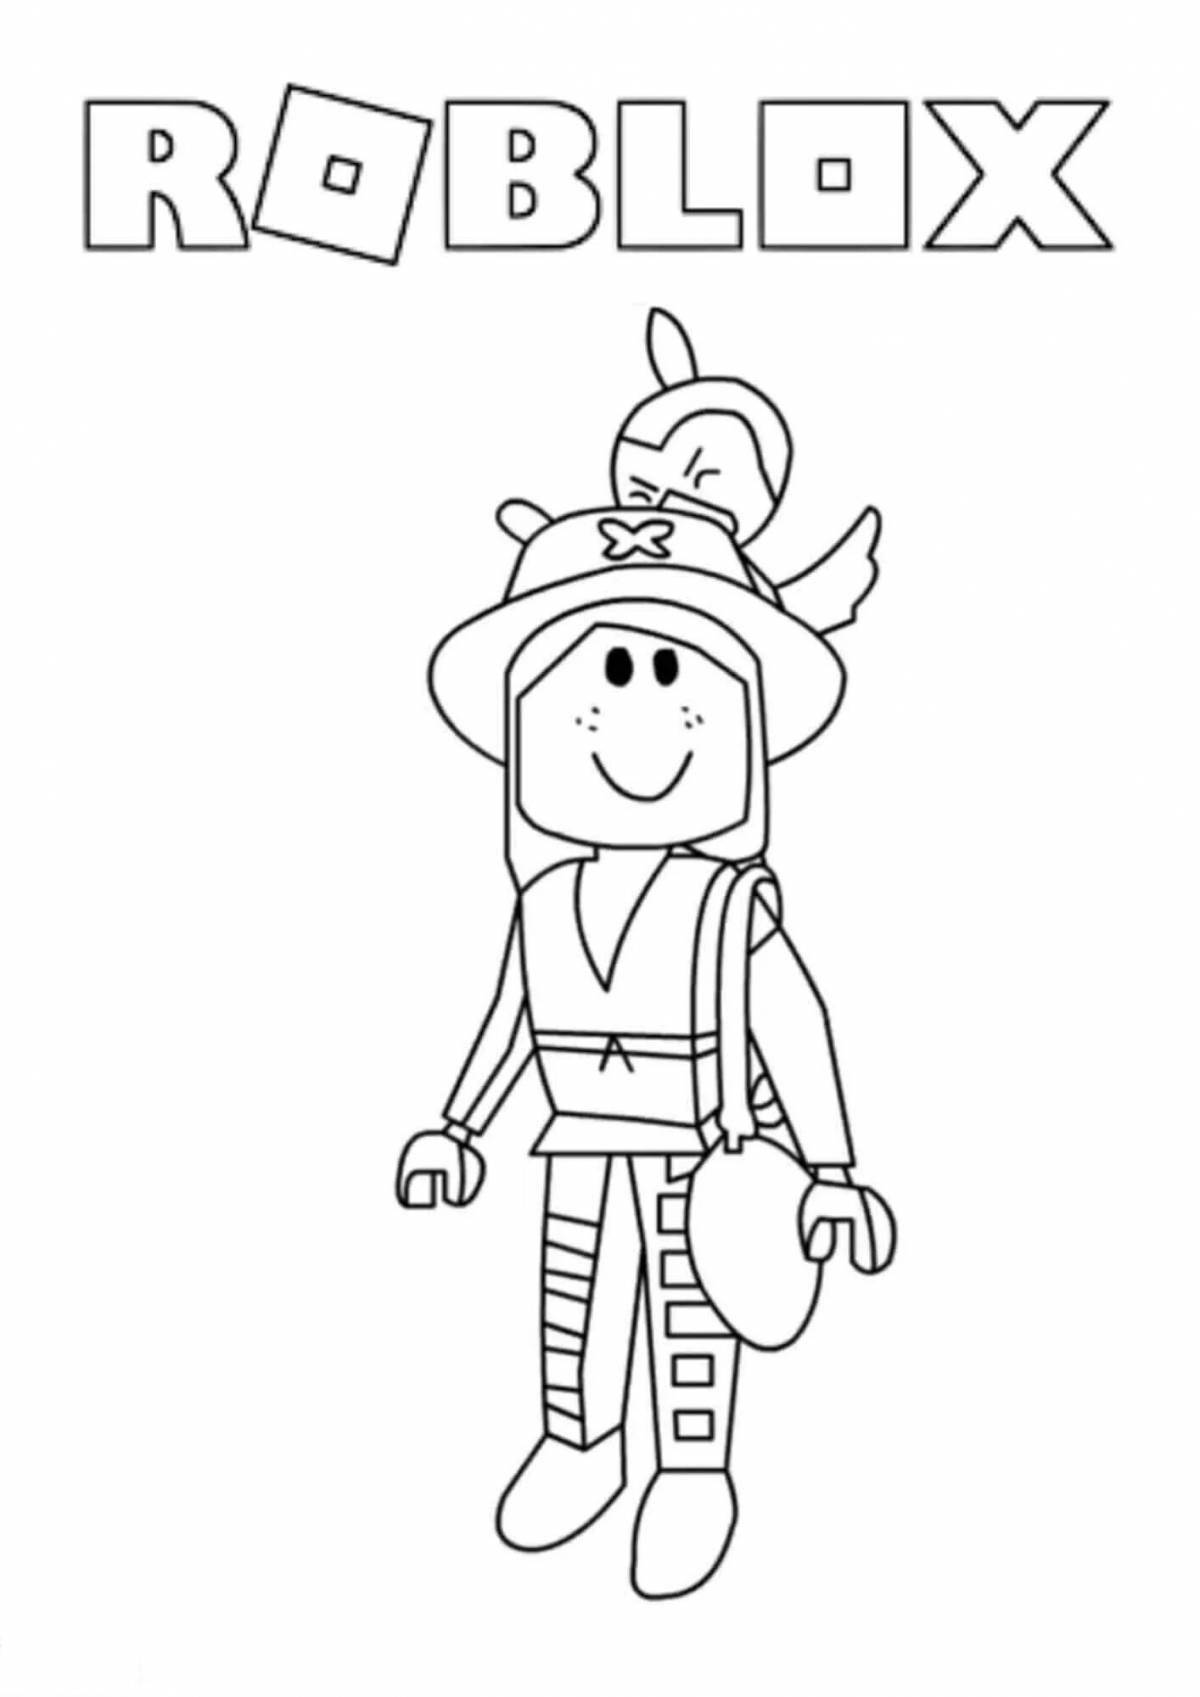 Awesome roblox coloring page